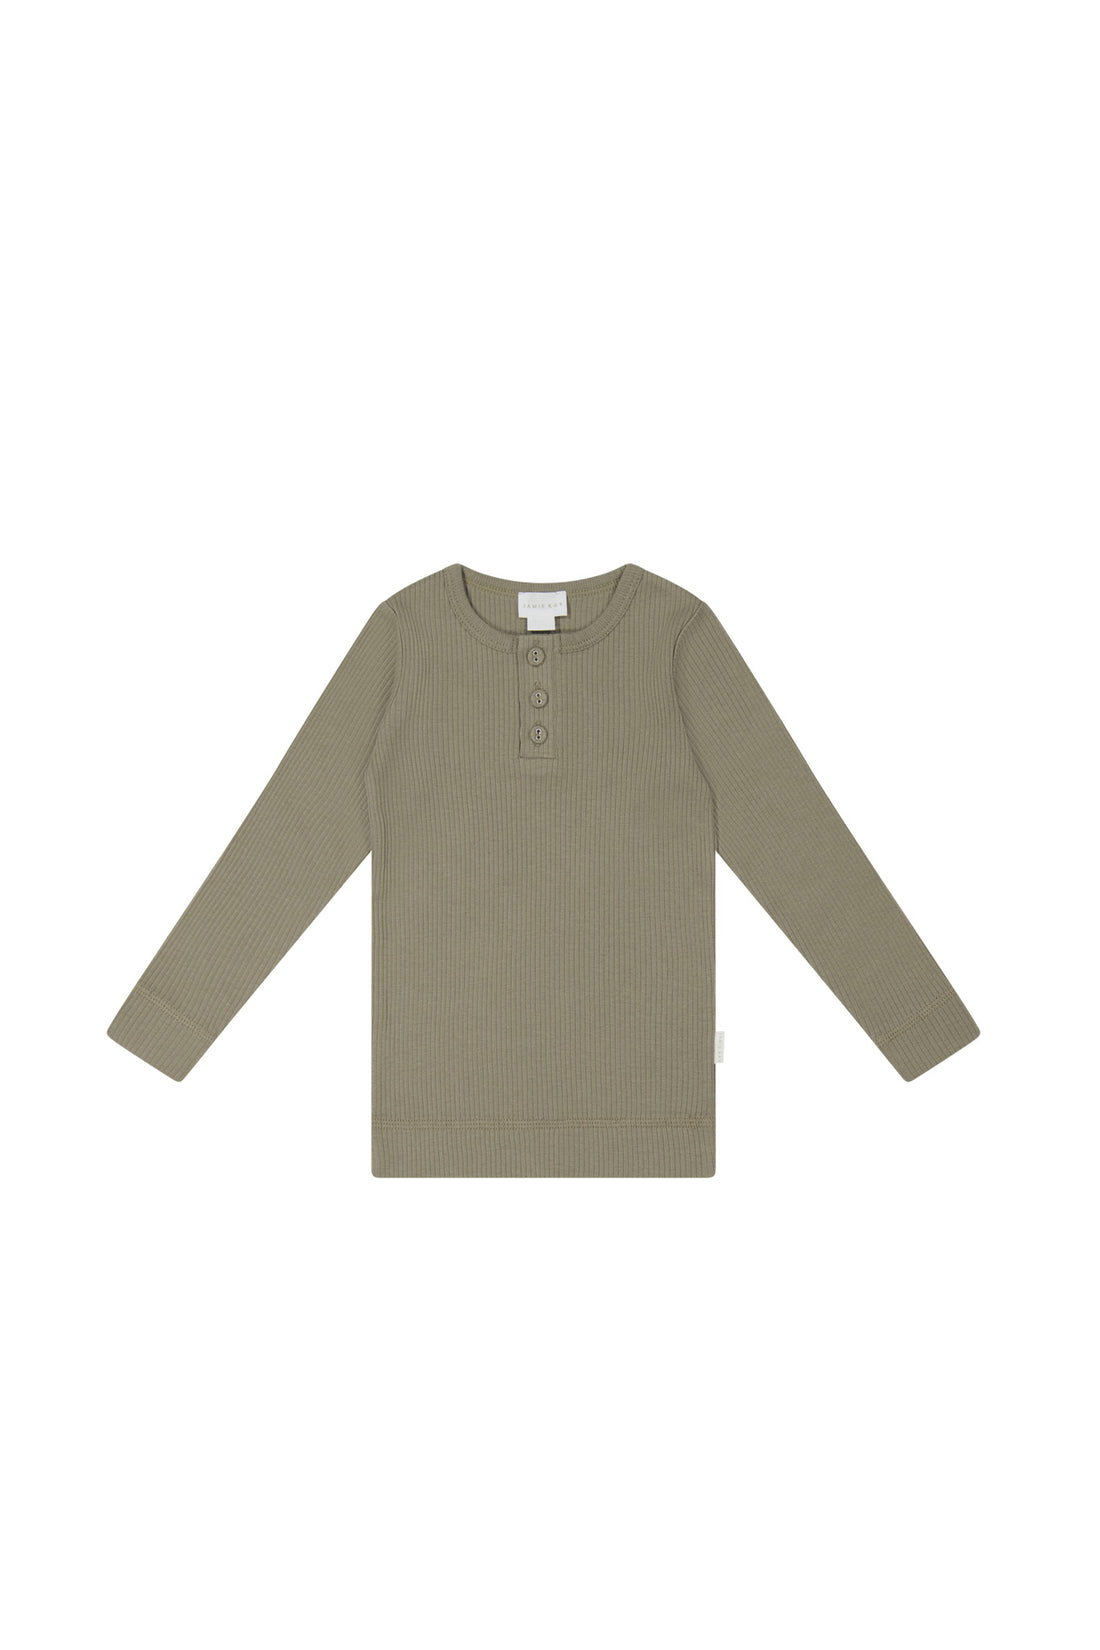 Organic Cotton Modal Long Sleeve Henley - Sepia Childrens Top from Jamie Kay NZ